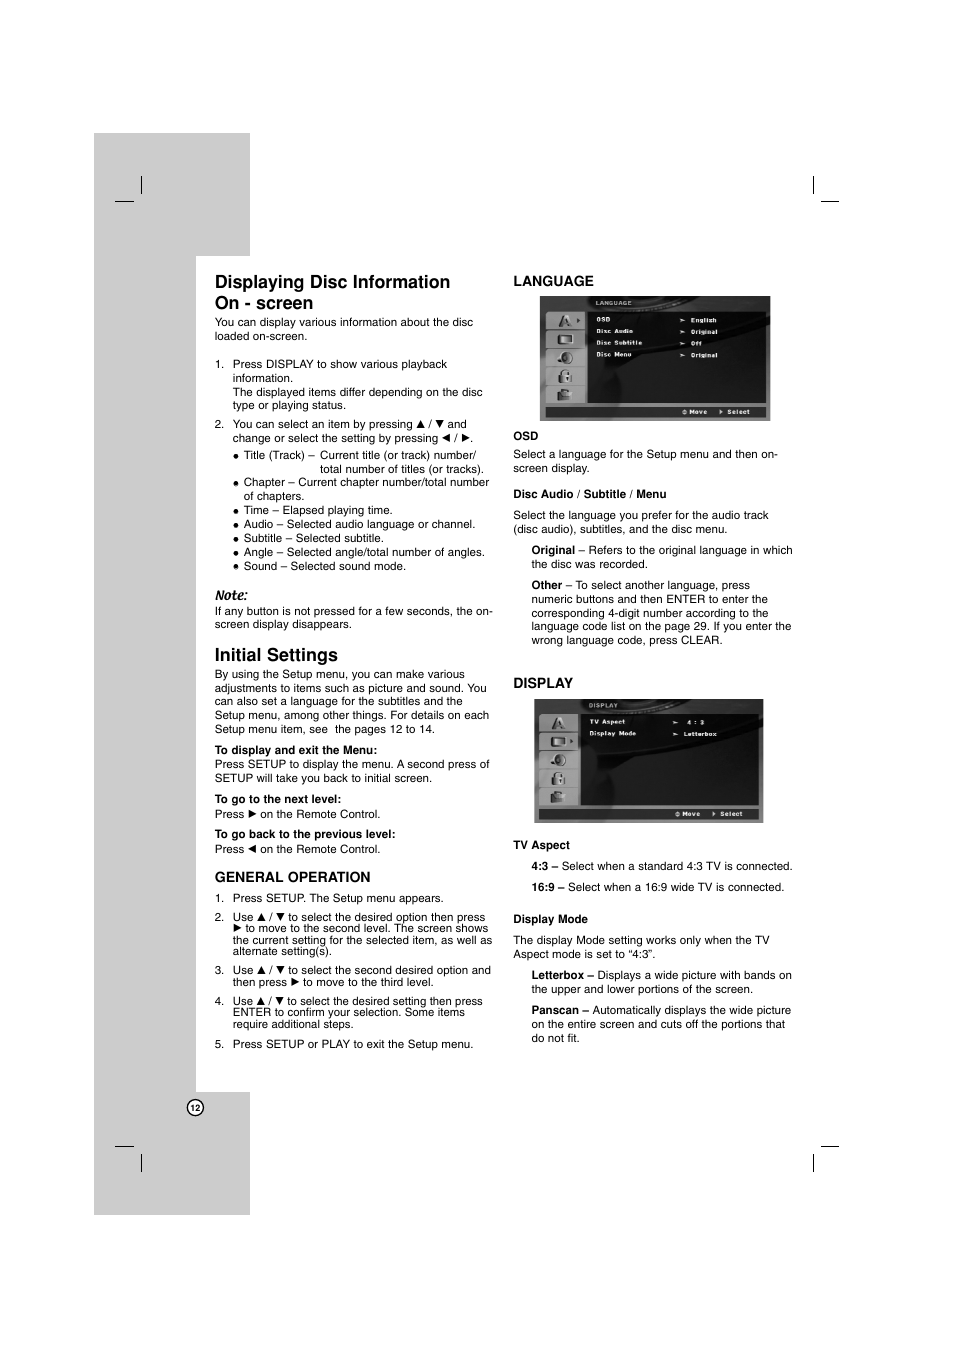 Displaying disc information on - screen, Initial settings | LG LHT799 User Manual | Page 12 / 33